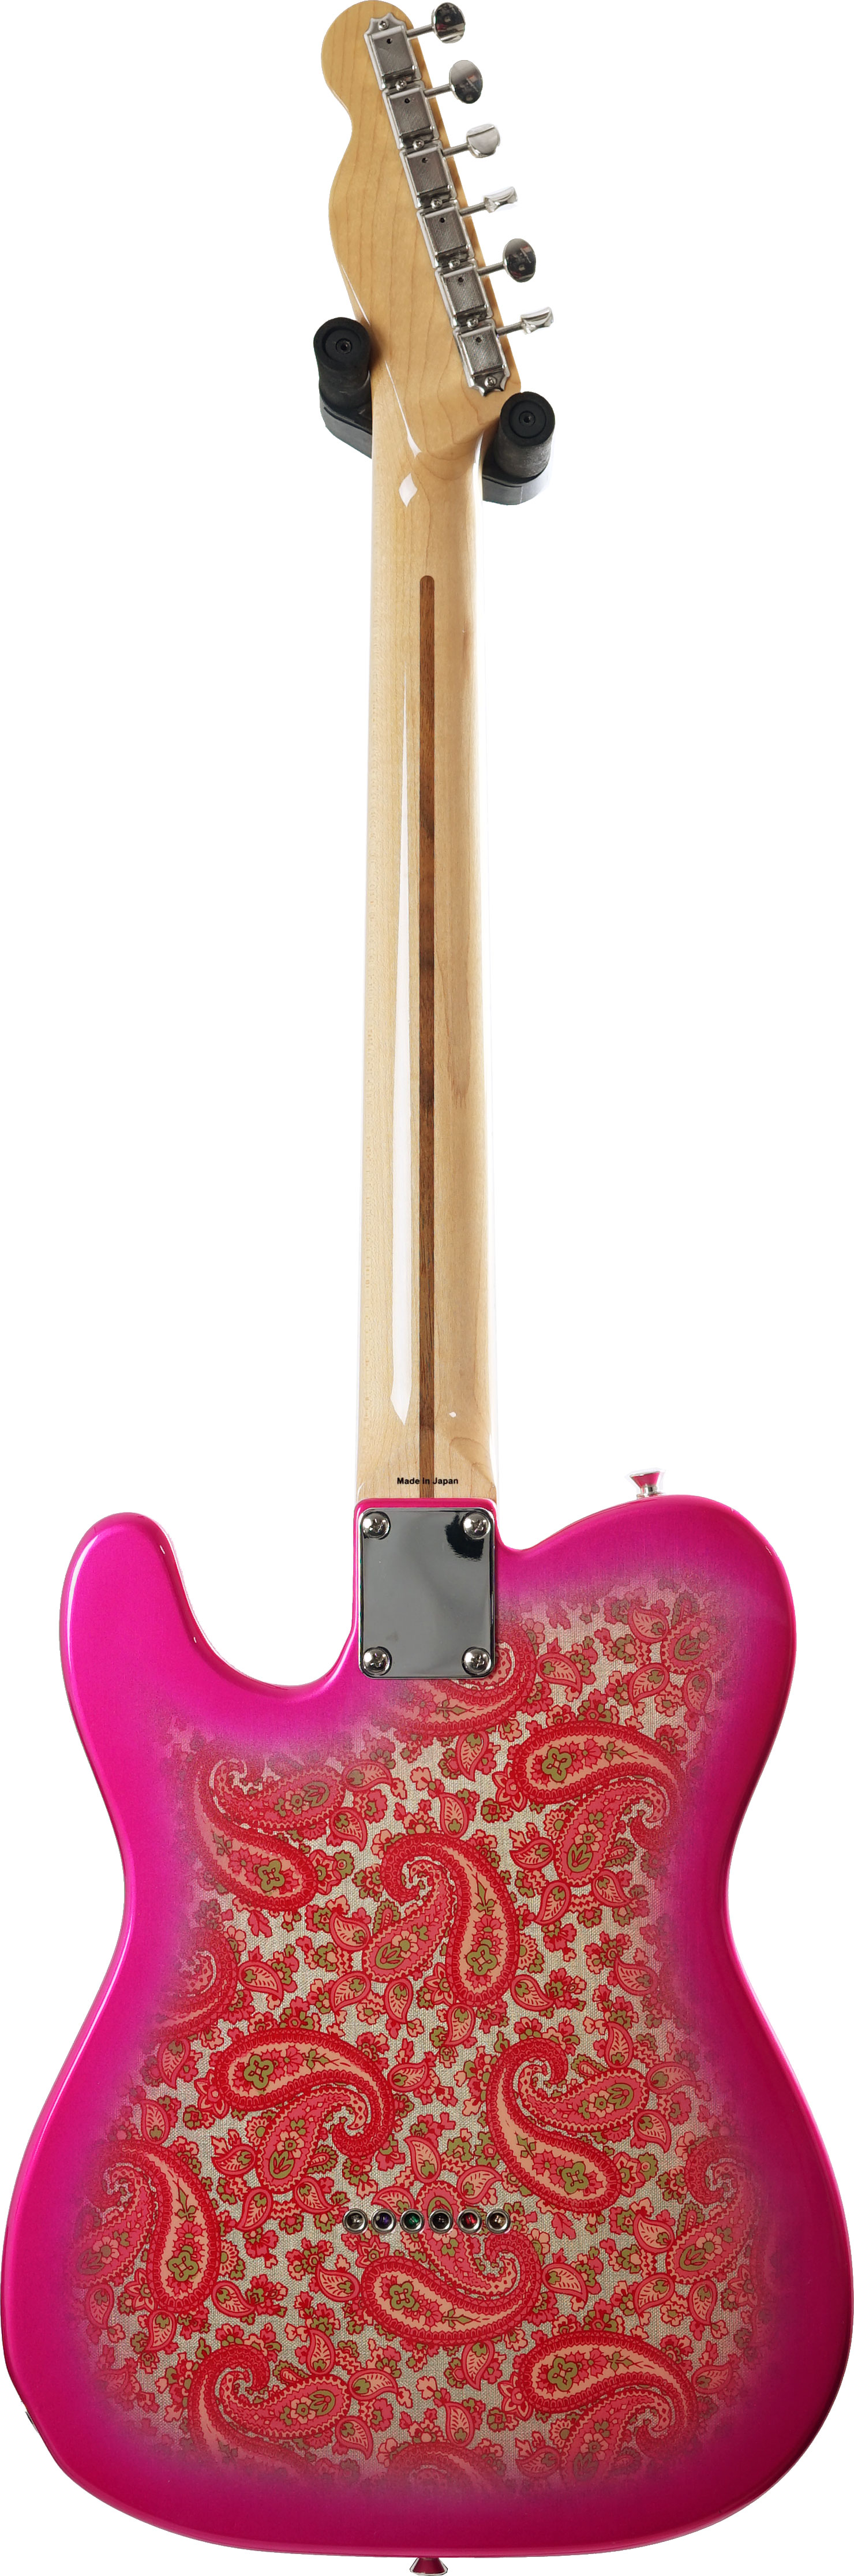 Tokai 2002 Gold Star Pink Paisley MIJ Maple Fingerboard (Pre-Owned)